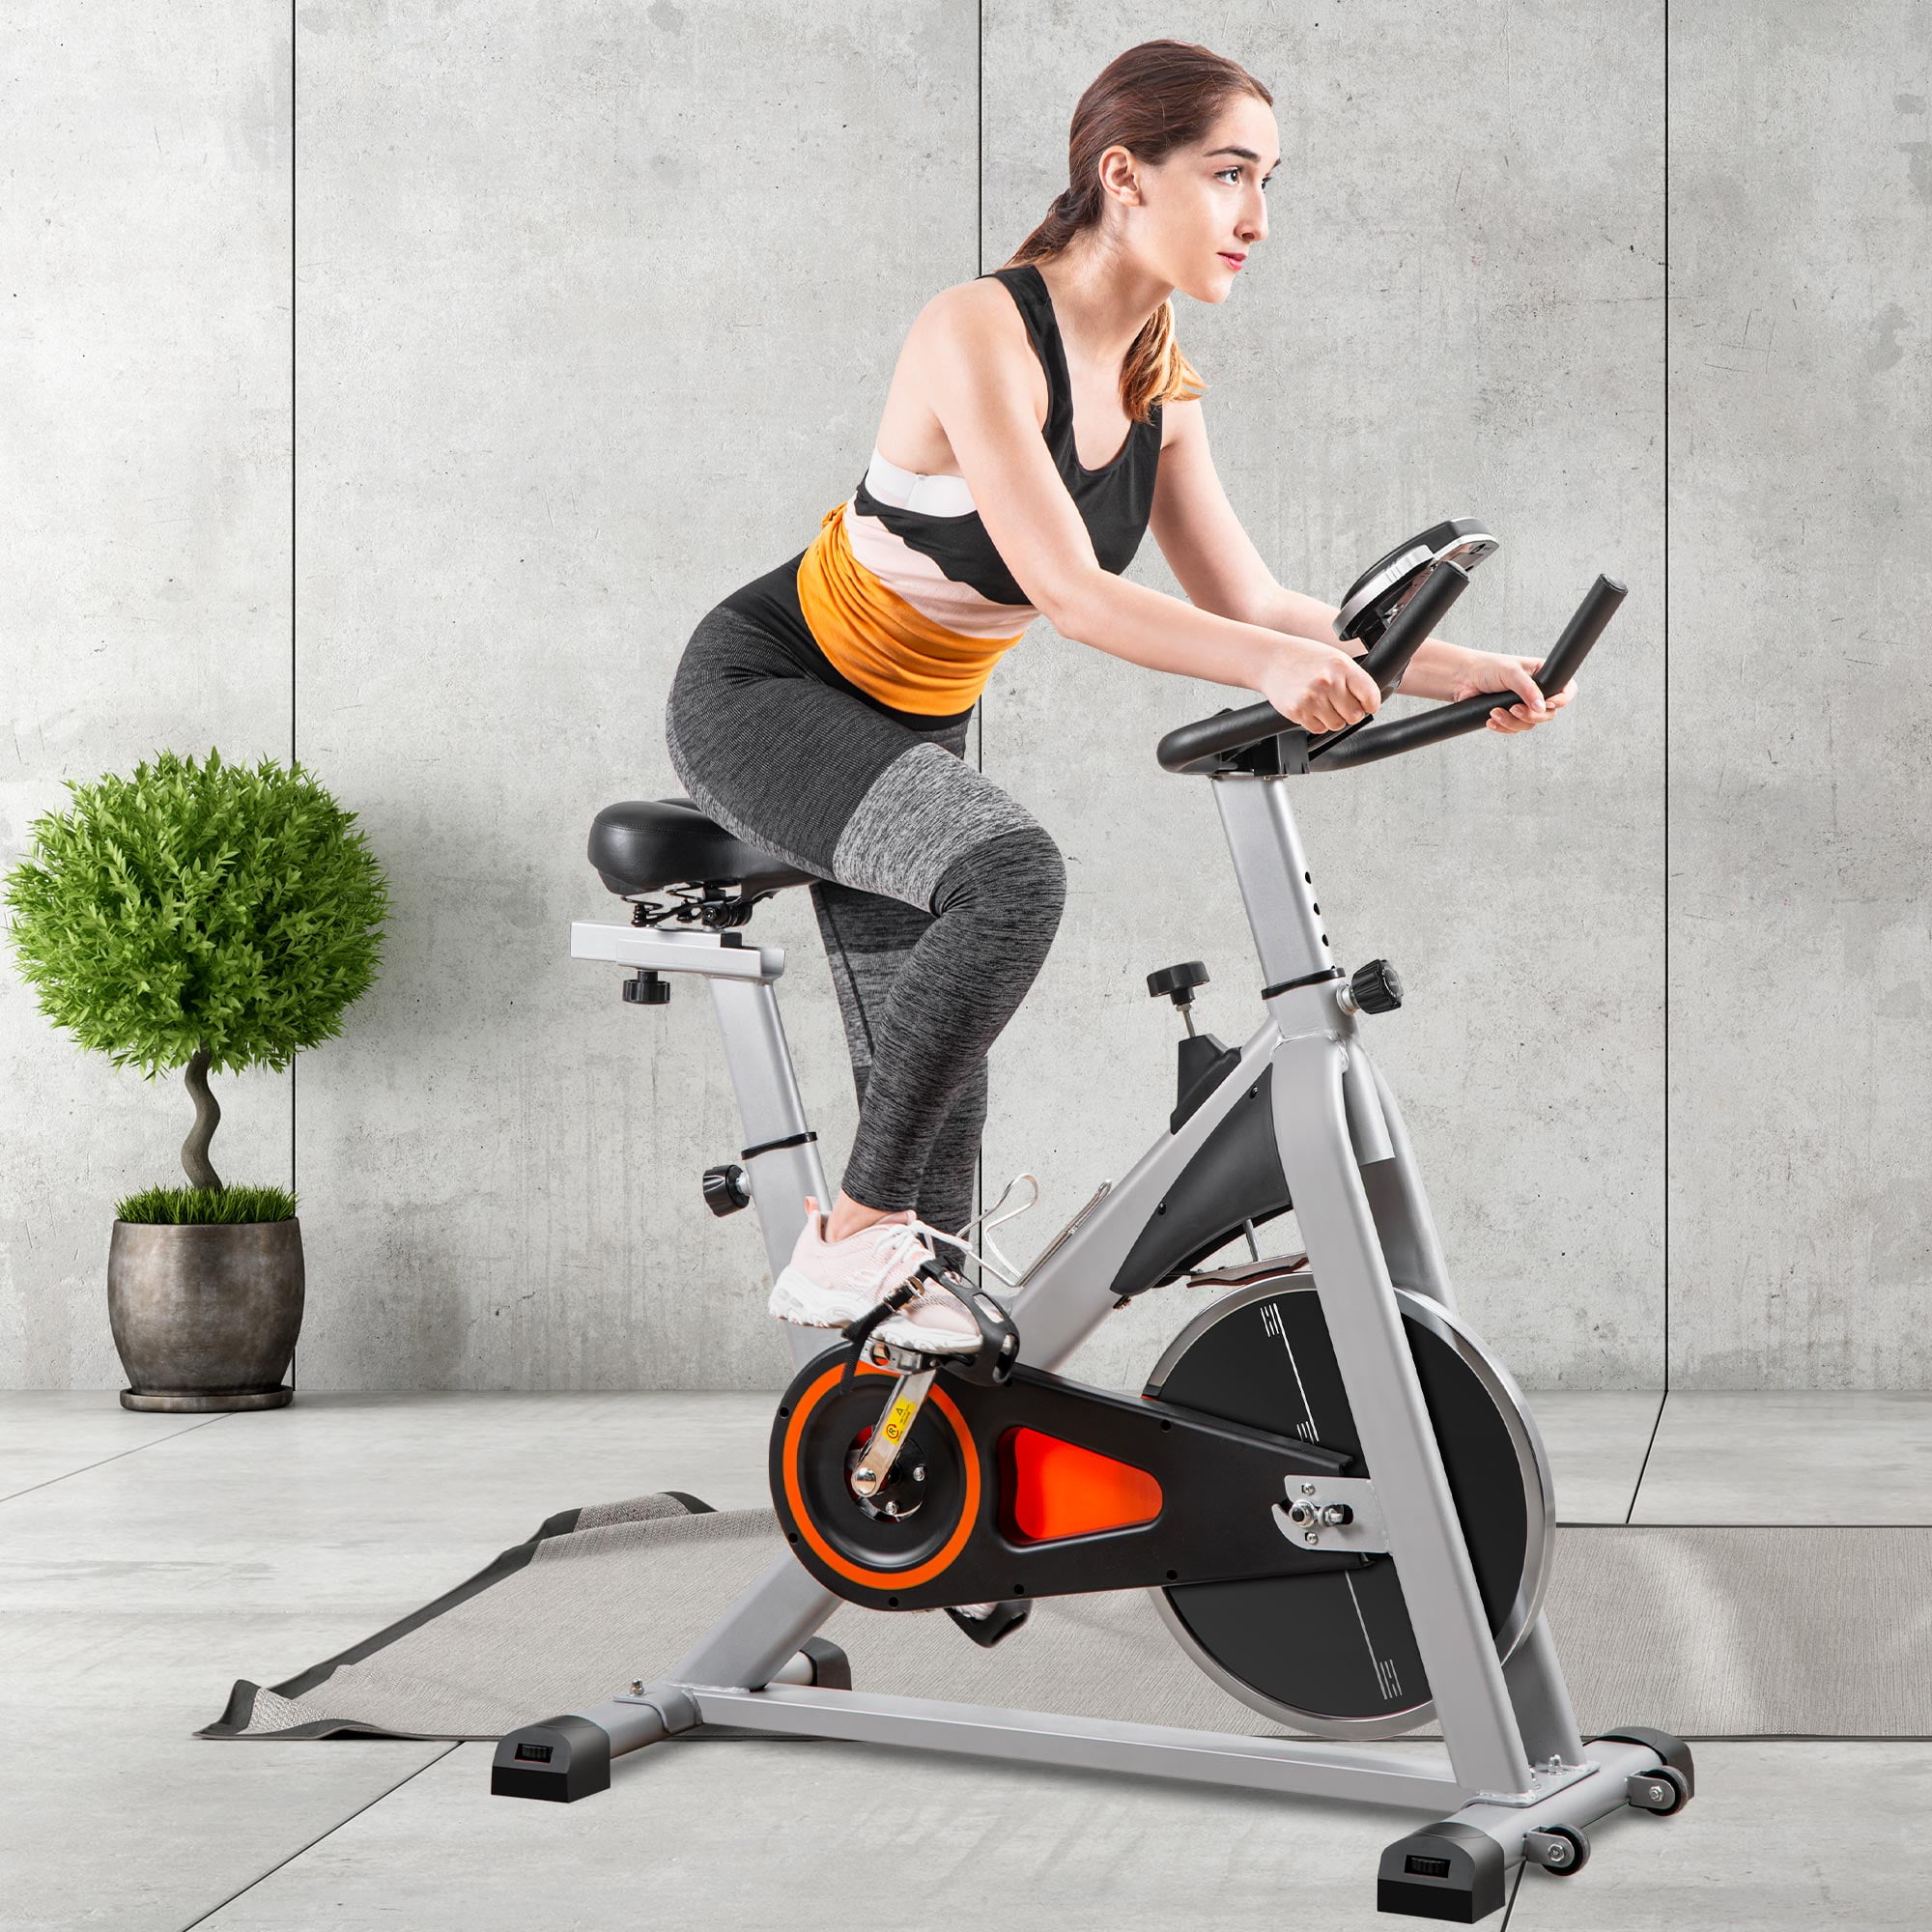 Details about   Exercise Stationary Bike Cycling Home Gym Cardio Workout Indoor Fitness Home 